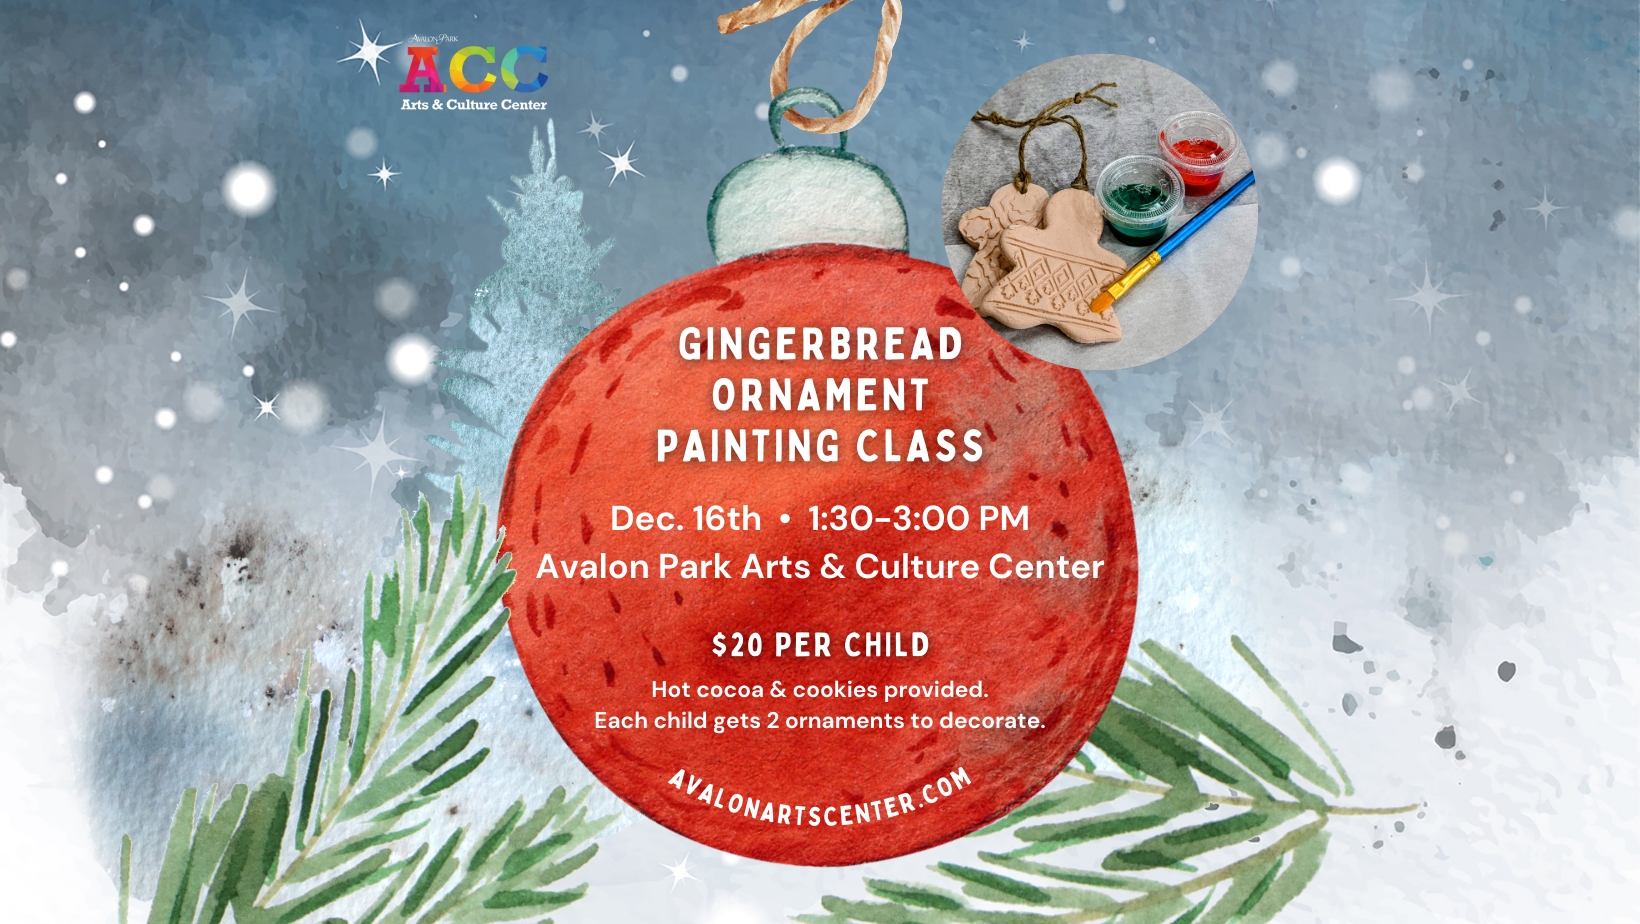 Gingerbread Ornament Painting Class